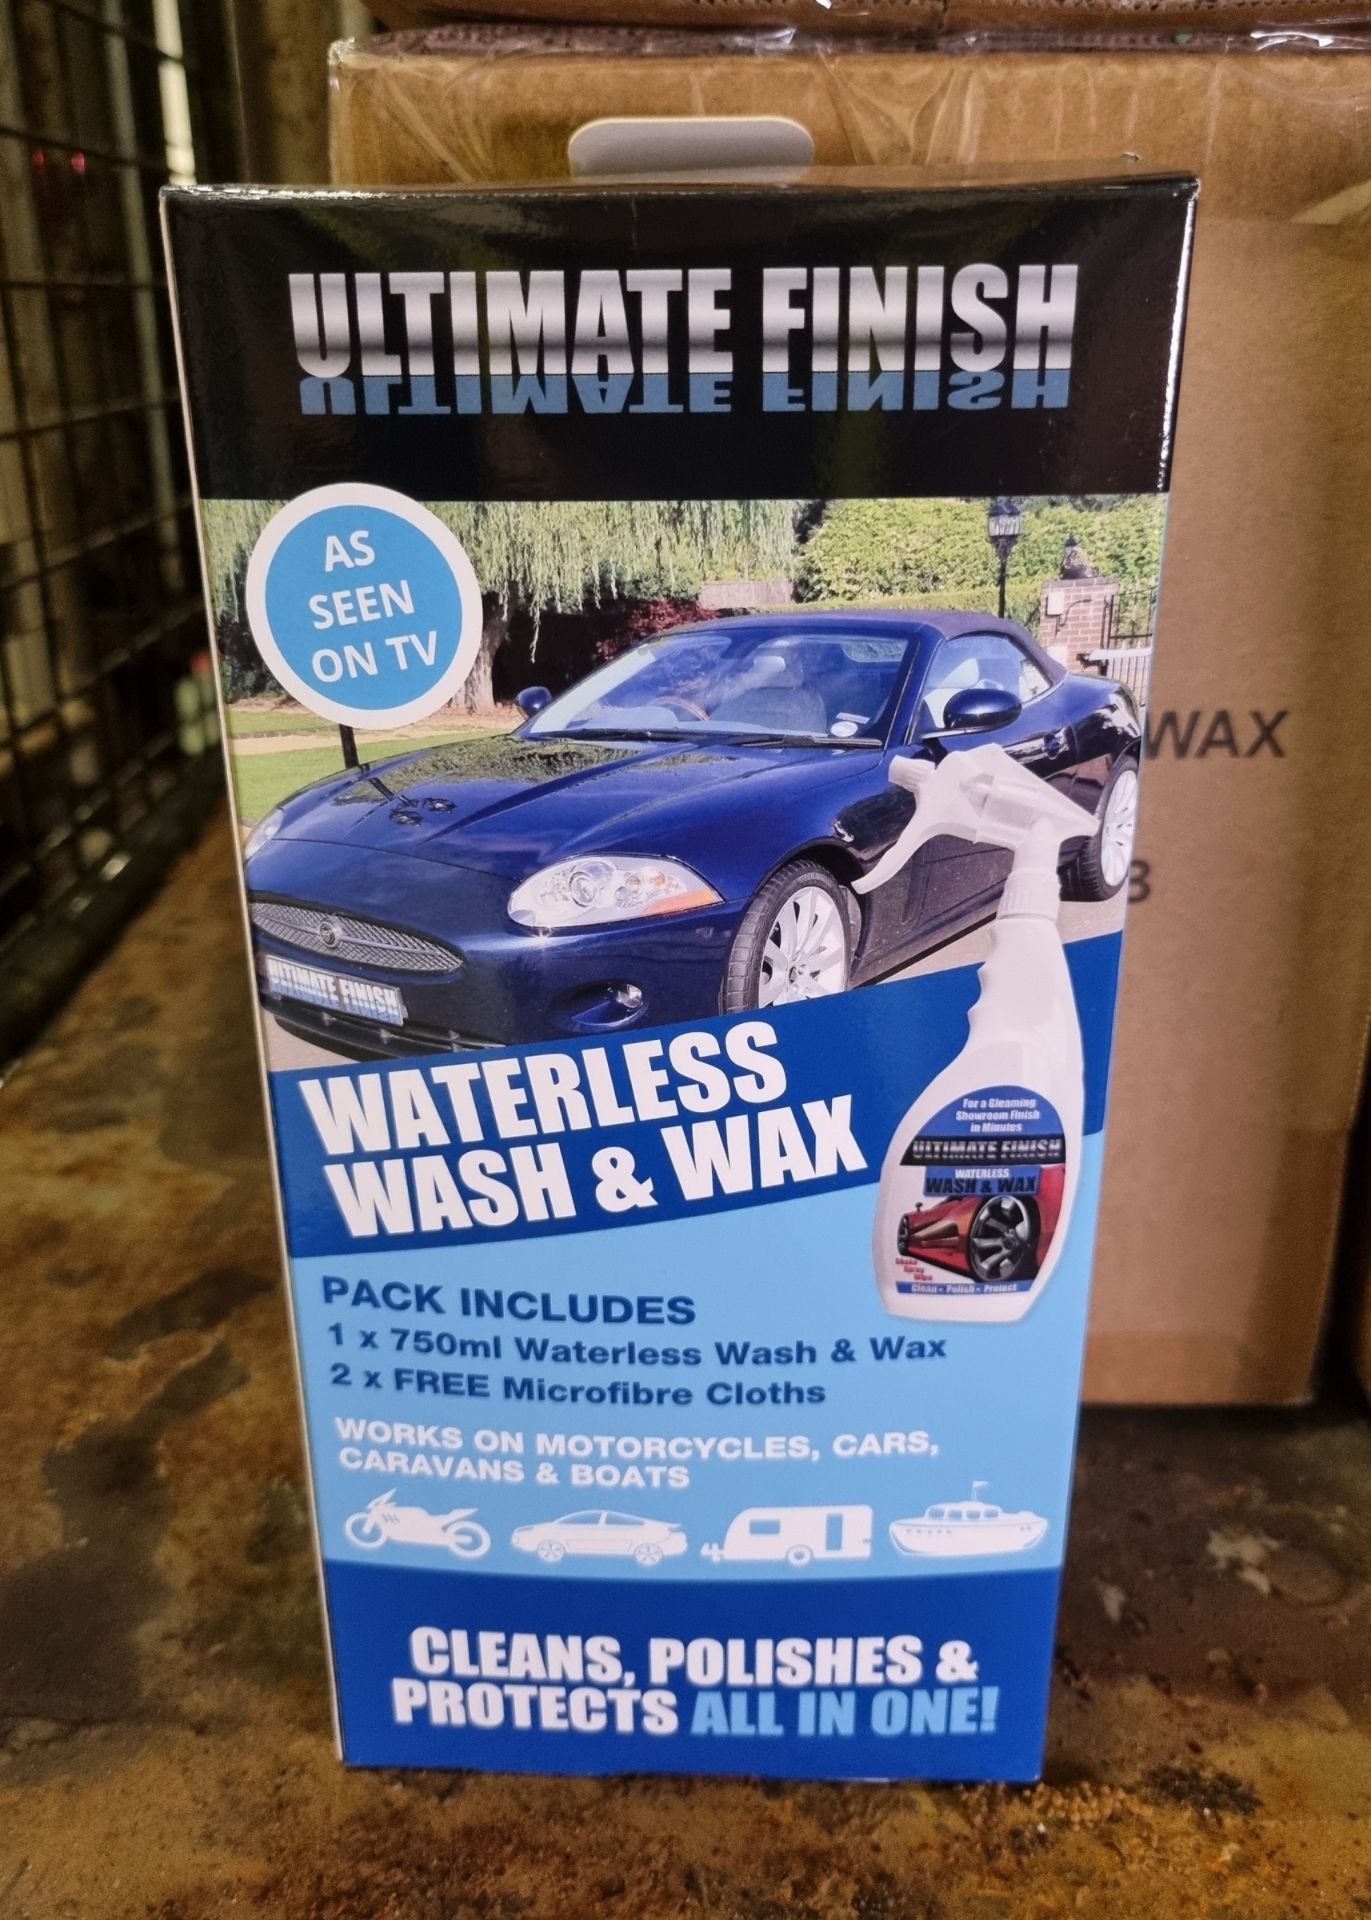 100x Ultimate Finish waterless wash & wax kits (750ml bottle and 2x microfibre cloths per pack) - Image 3 of 7